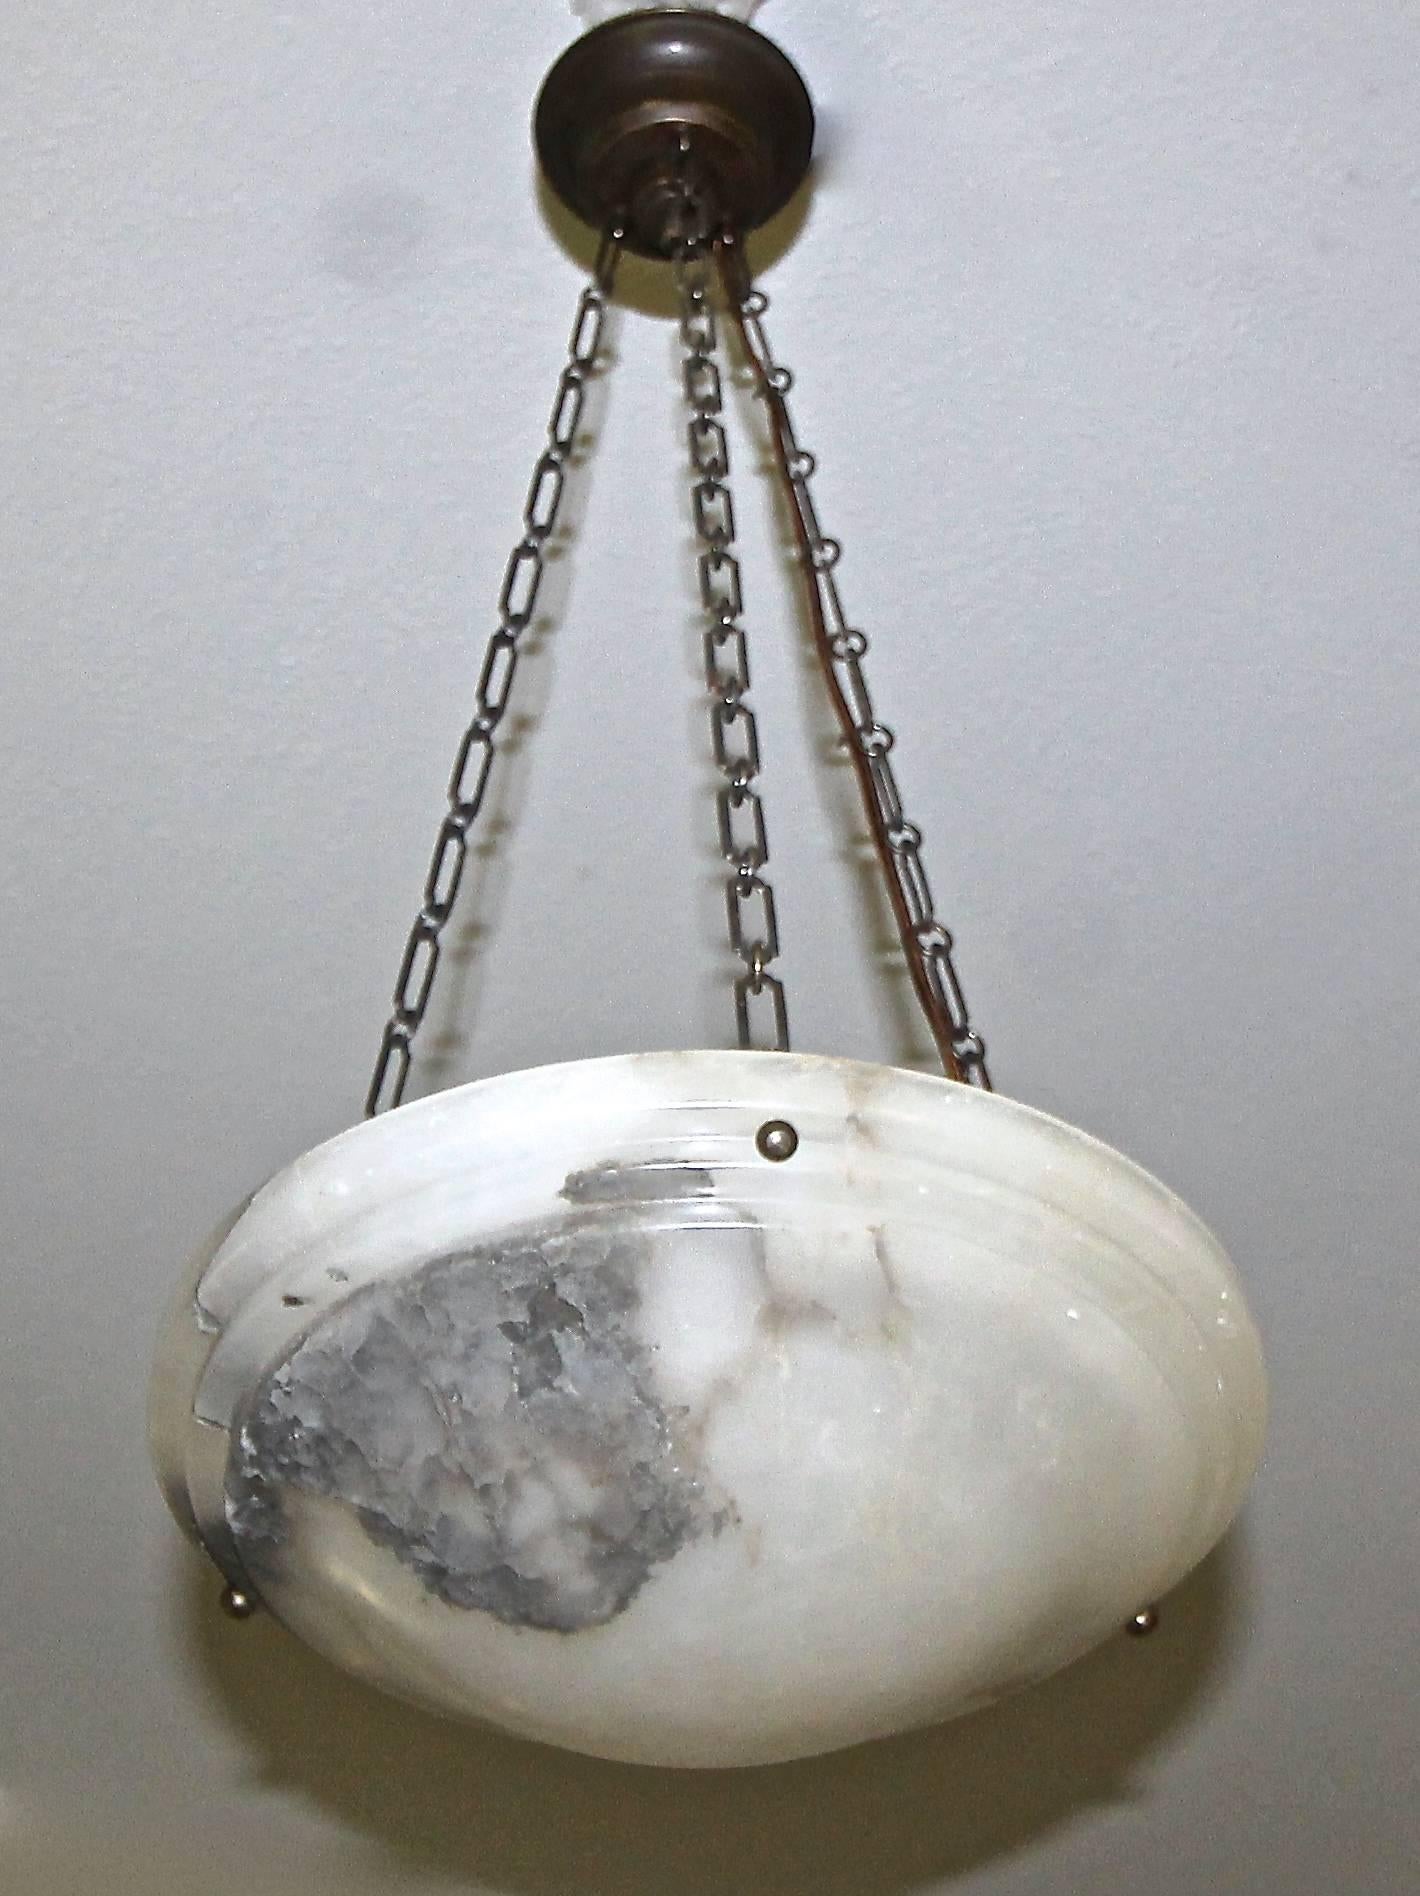 French alabaster chandelier or pendant with darkened bronze fittings in the Directoire style. Alabaster bowl is in very good condition with beautiful veining and is almost translucent when light. Fittings are delicately proportioned with the size